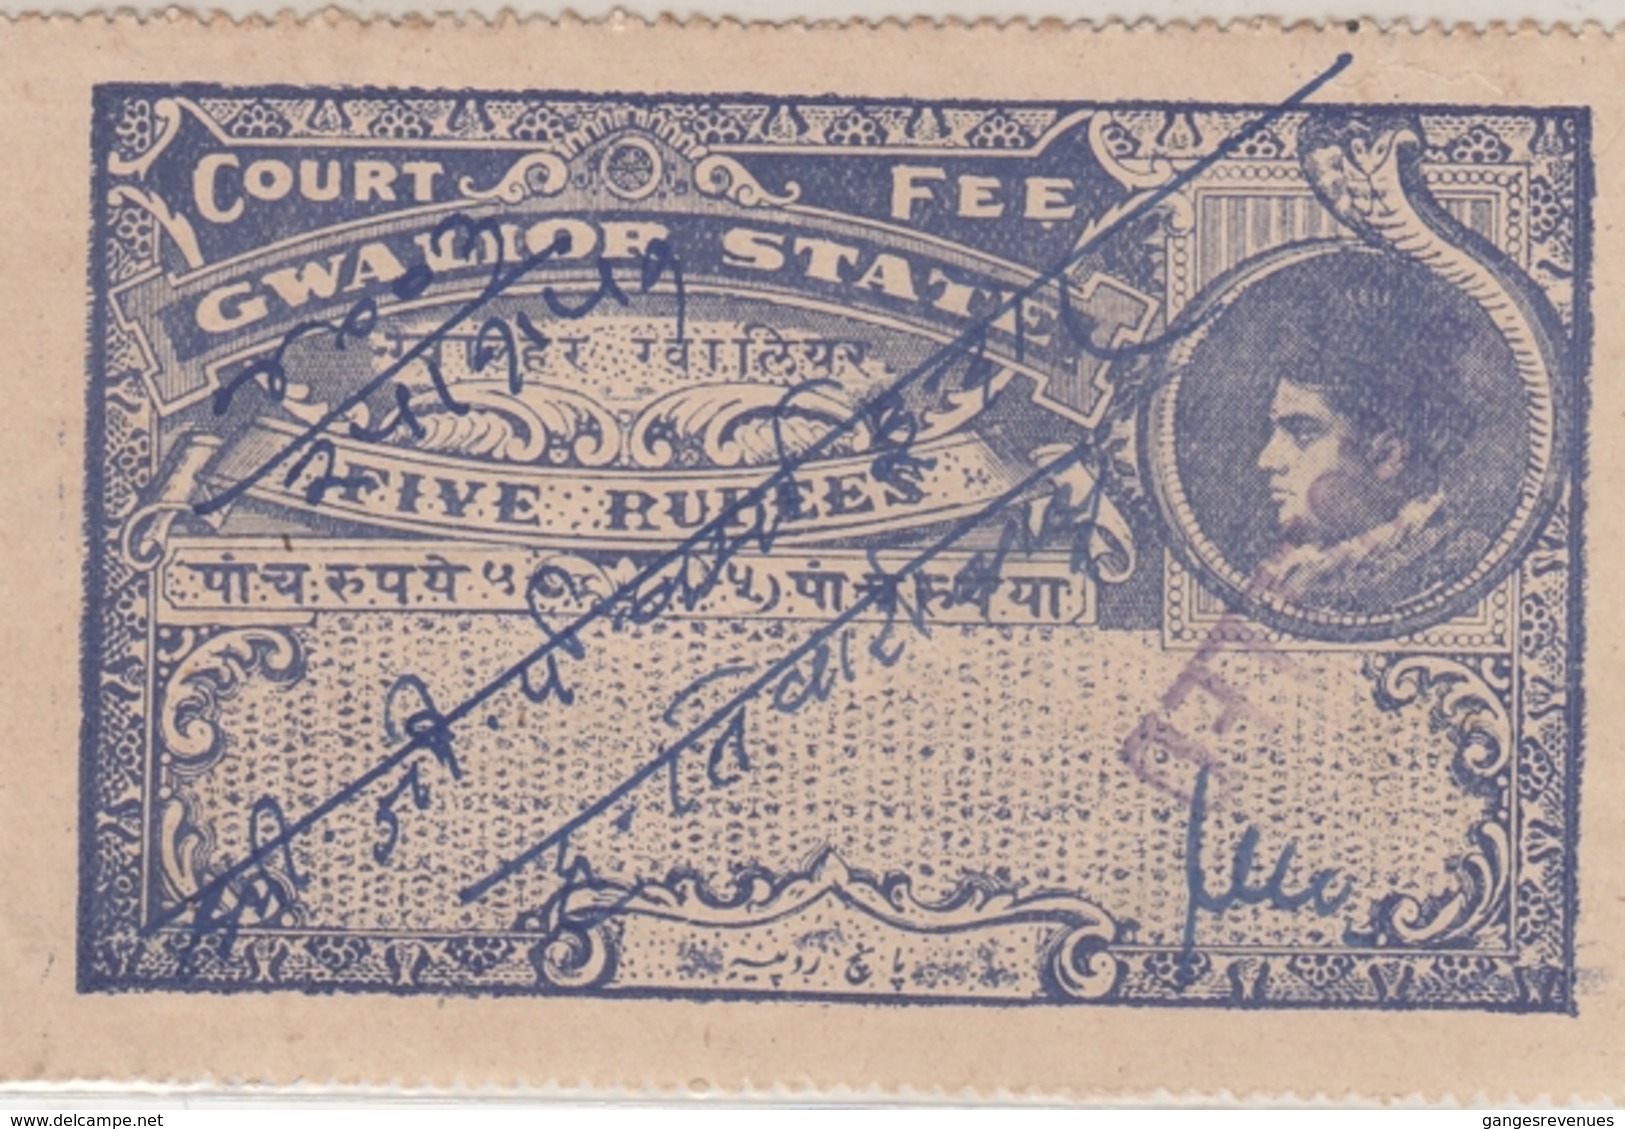 GWALIOR  State  5 Rupees  King Jivaji Rao  Court Fee  Type 22   #  24717   D India  Inde  Indien Revenue Fiscaux - Gwalior